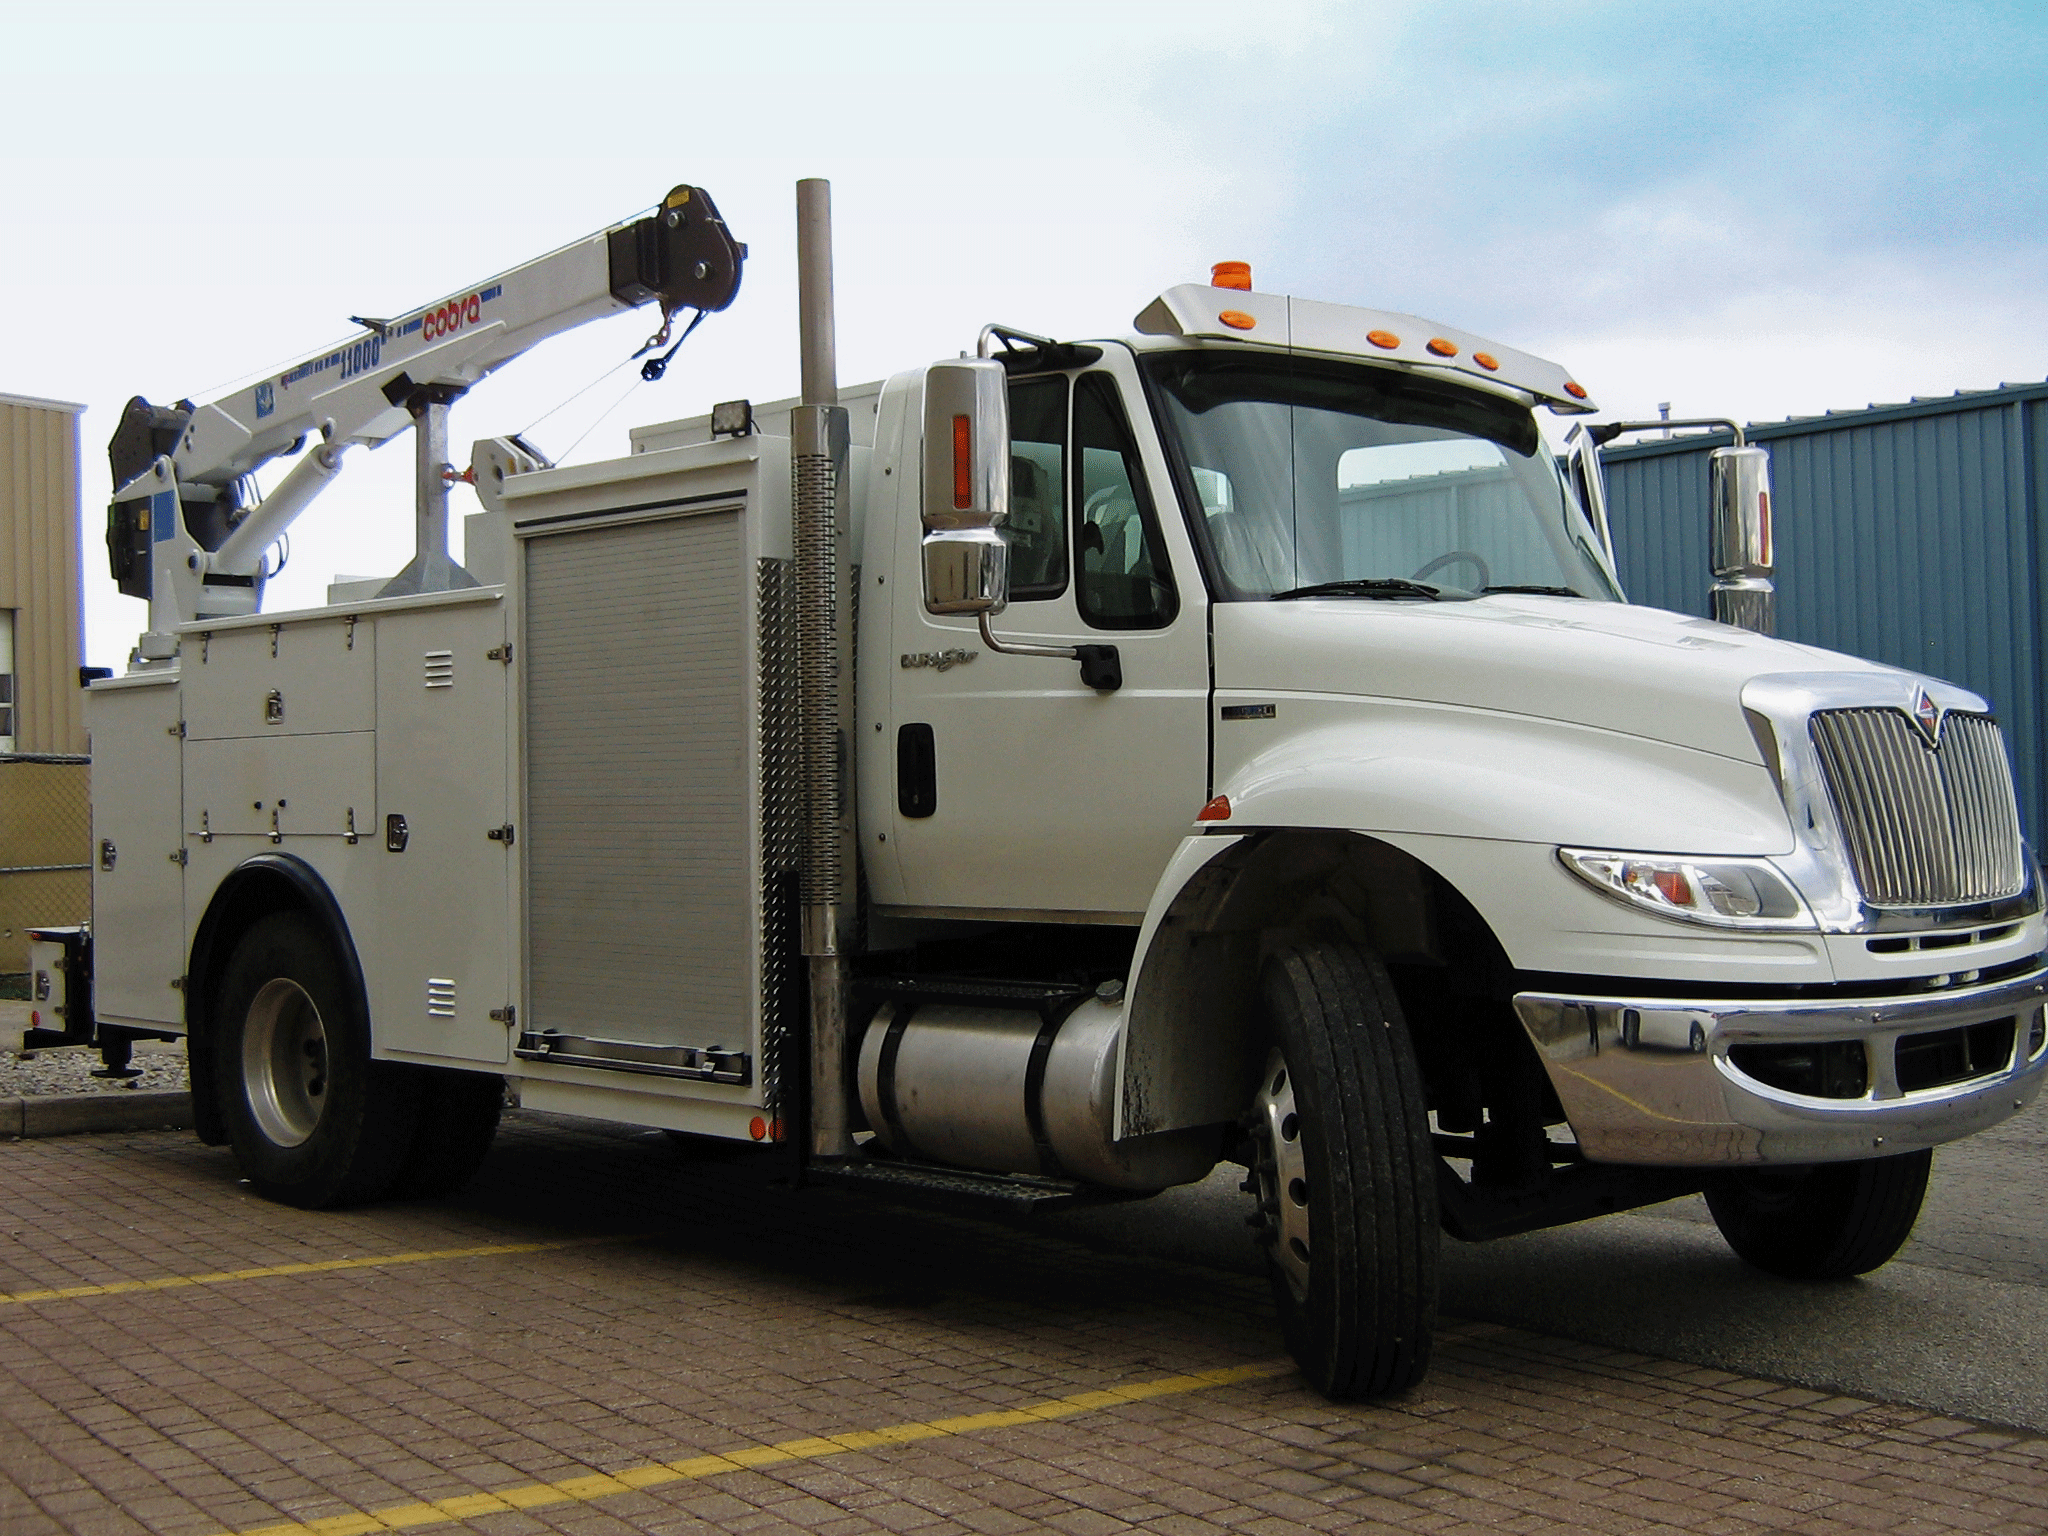 front and passender side view of a truck